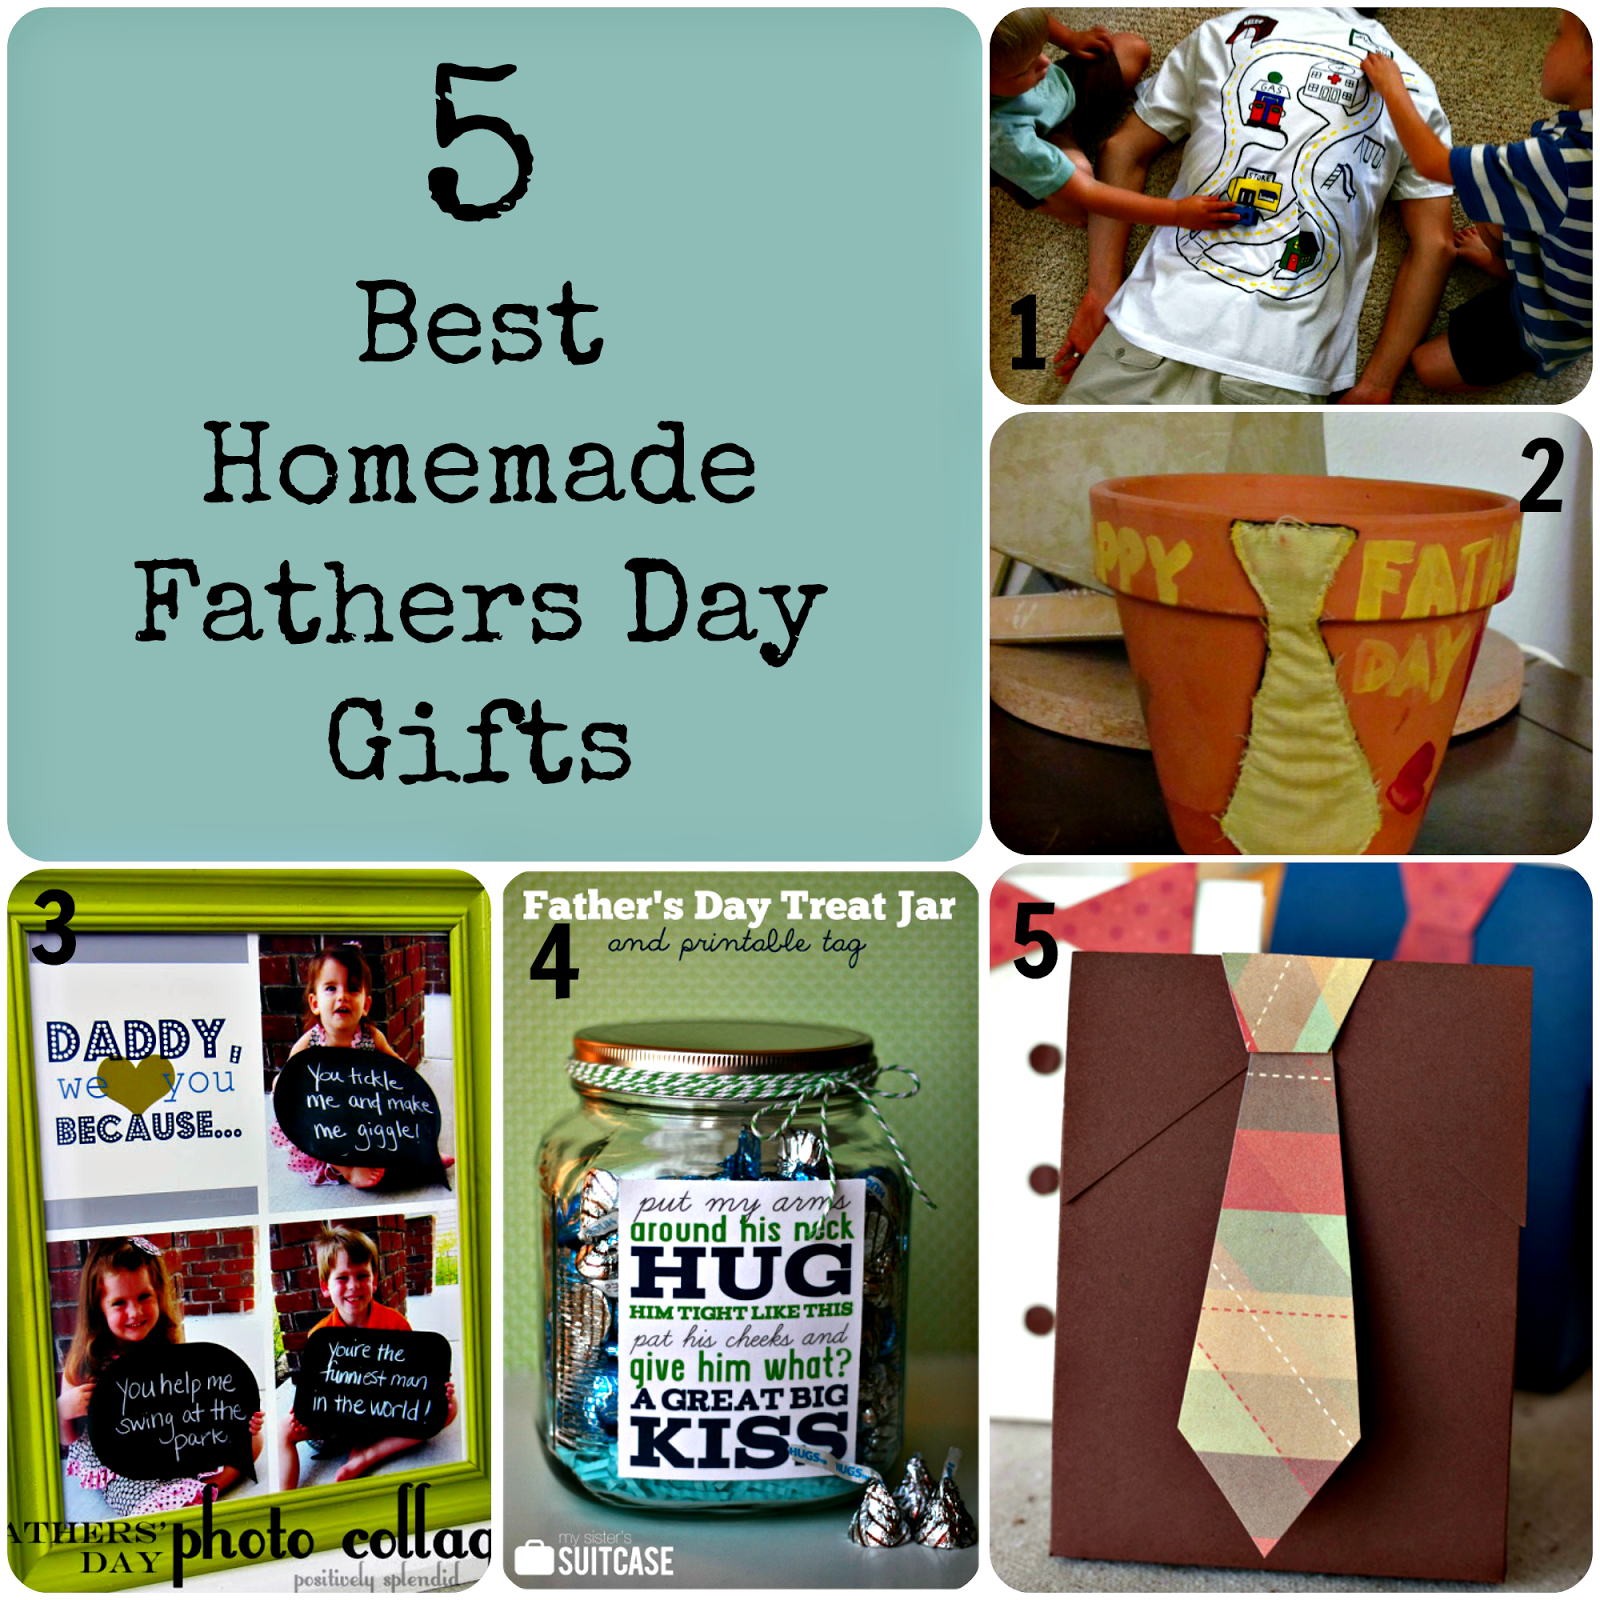 Home Maid Simple 5 Best homemade Fathers Day GIfts jpg (1600x1600)